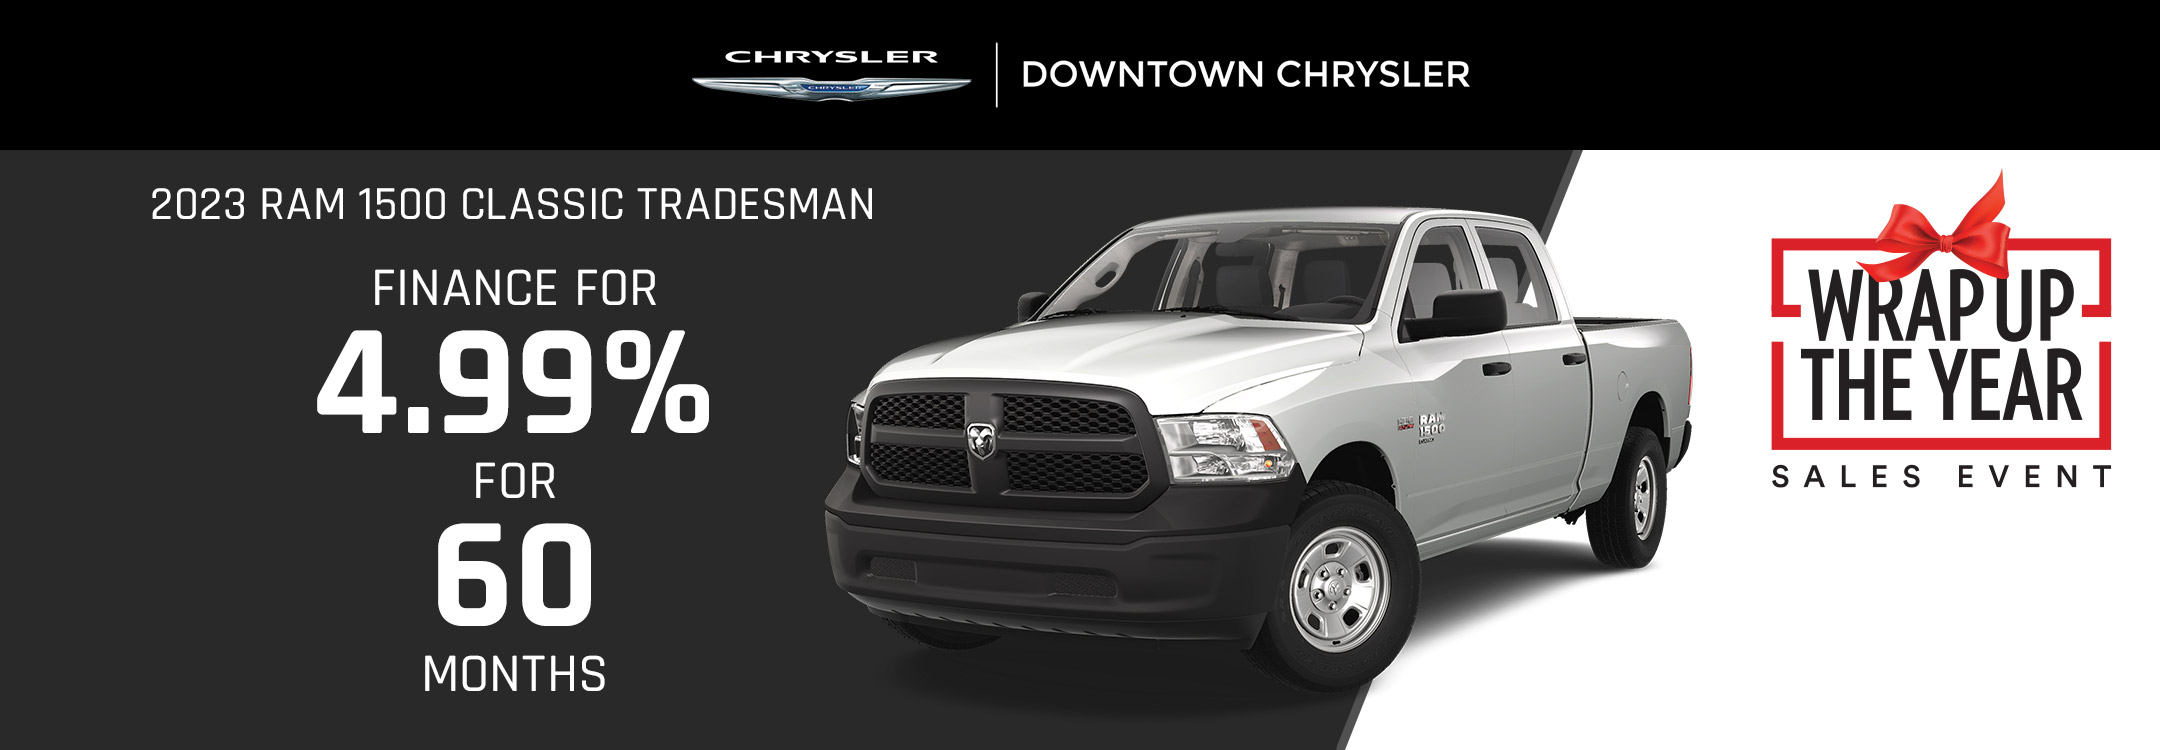 Wrap Up The Year Sales Event | Downtown Chrysler